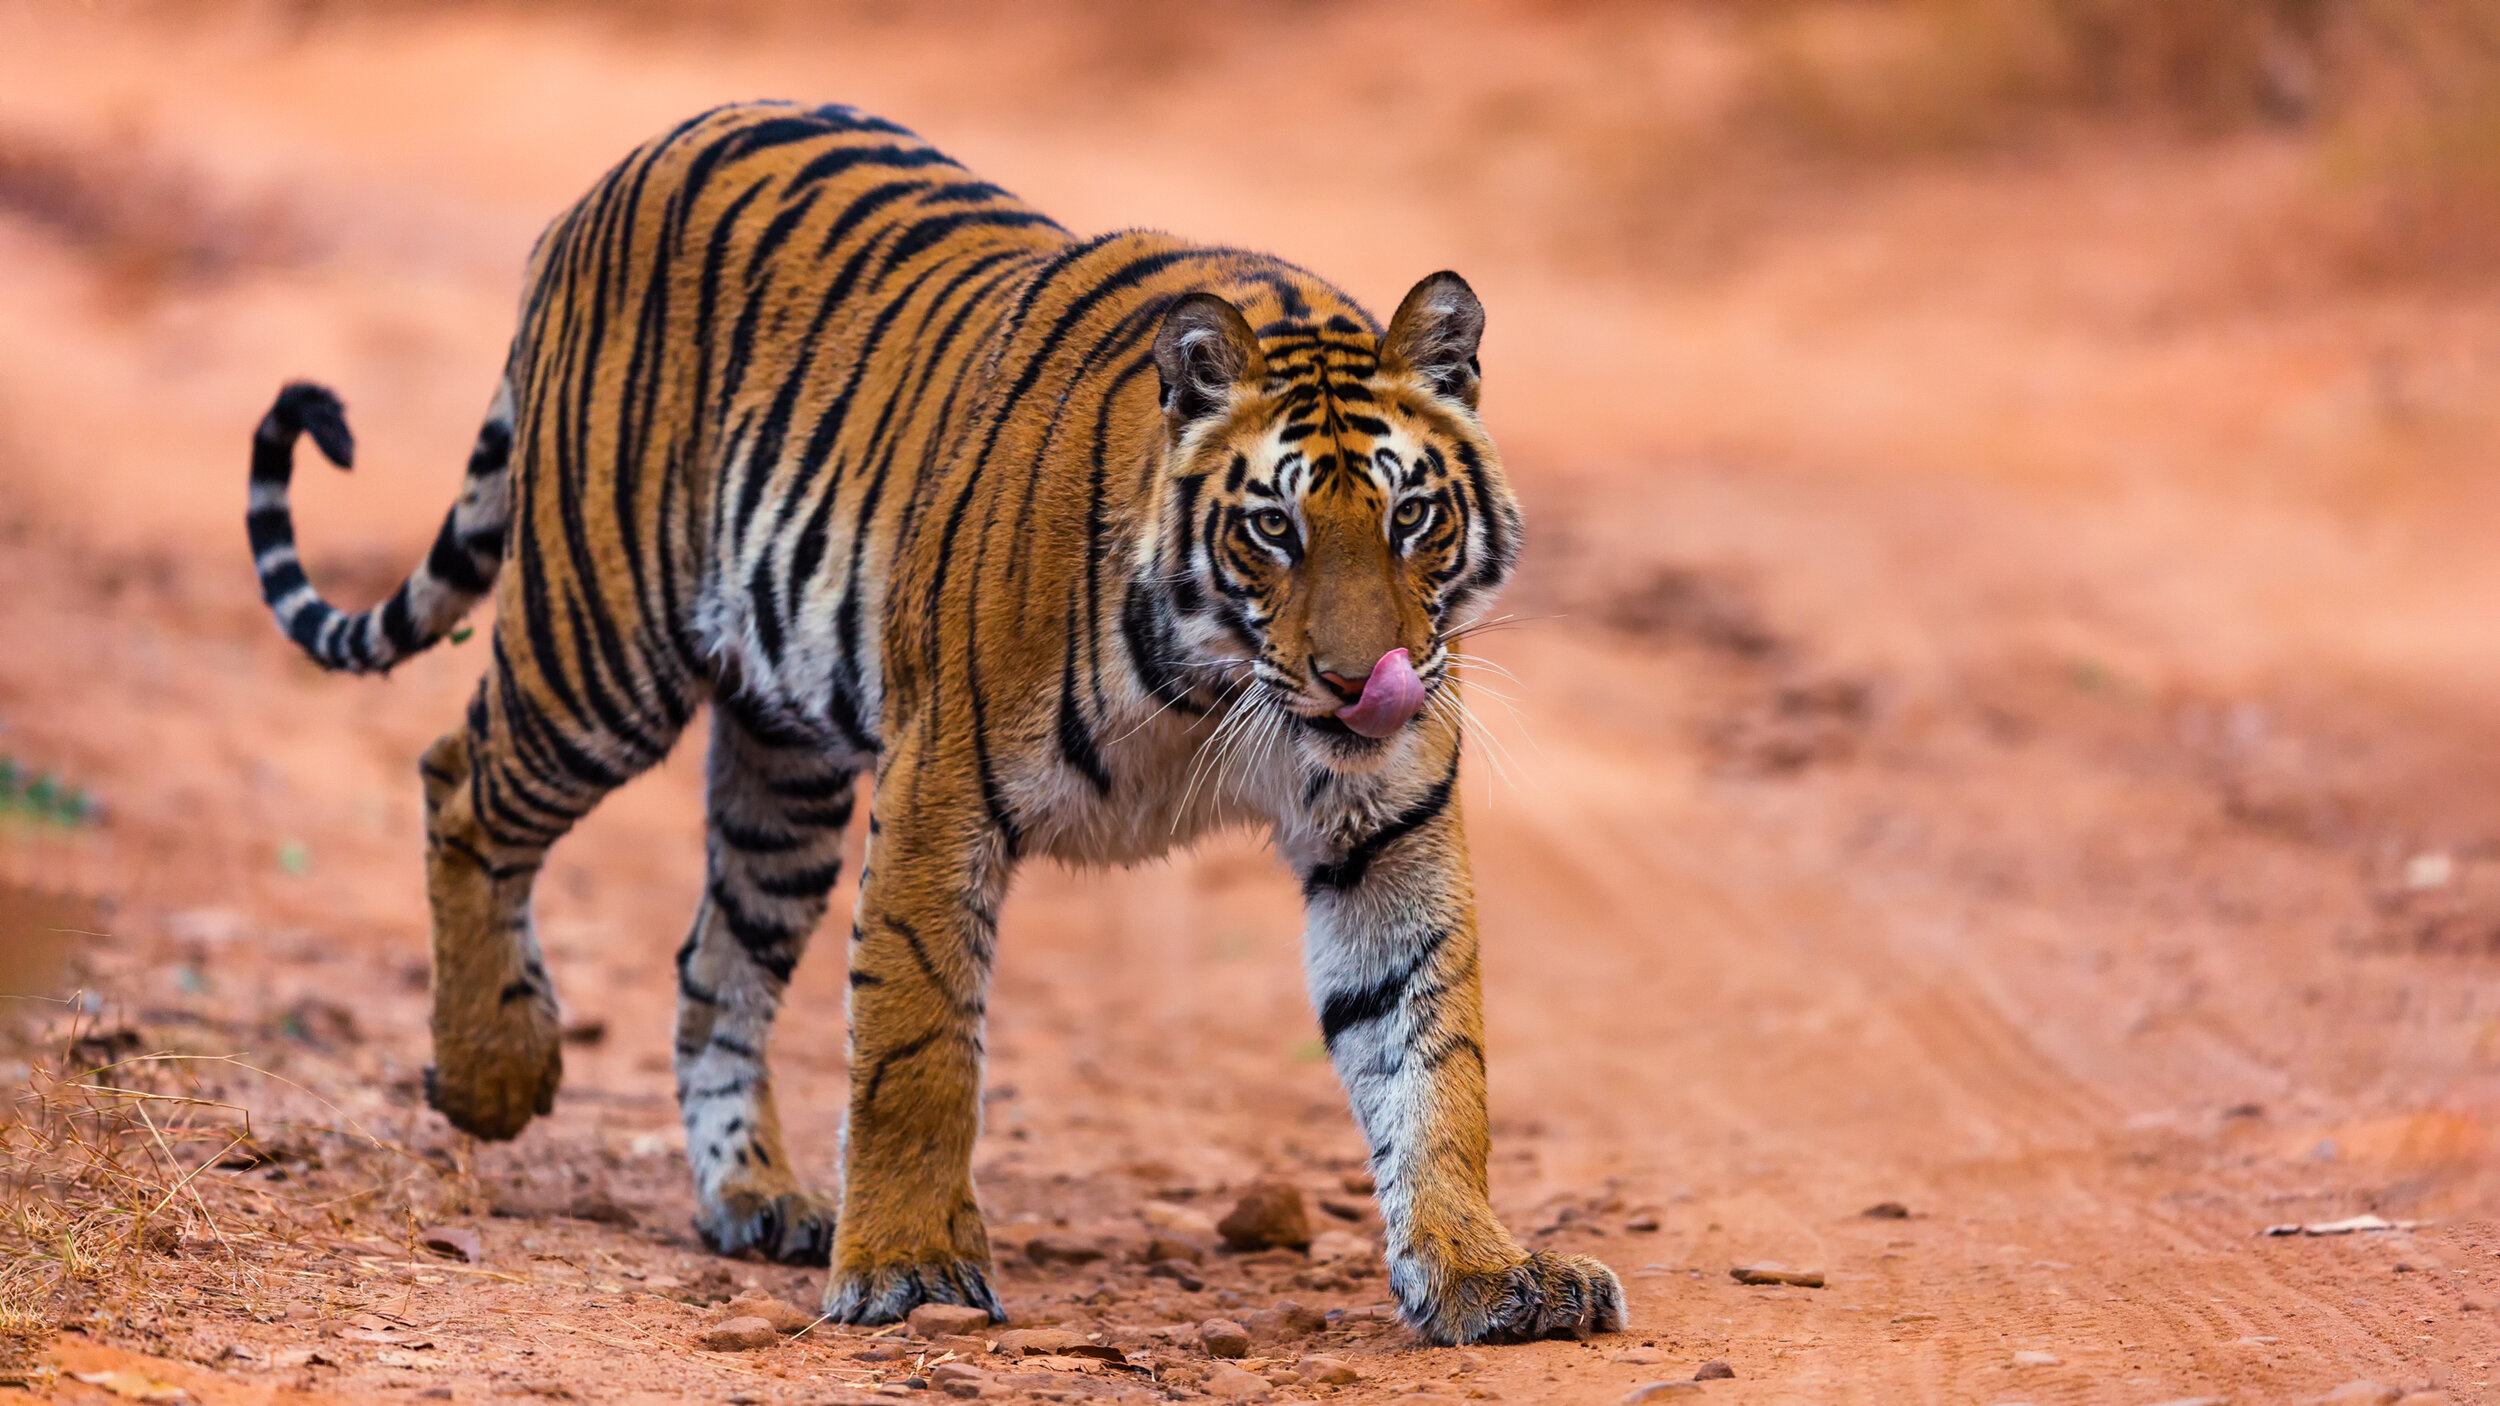 Bengal Tiger, The Animal Facts